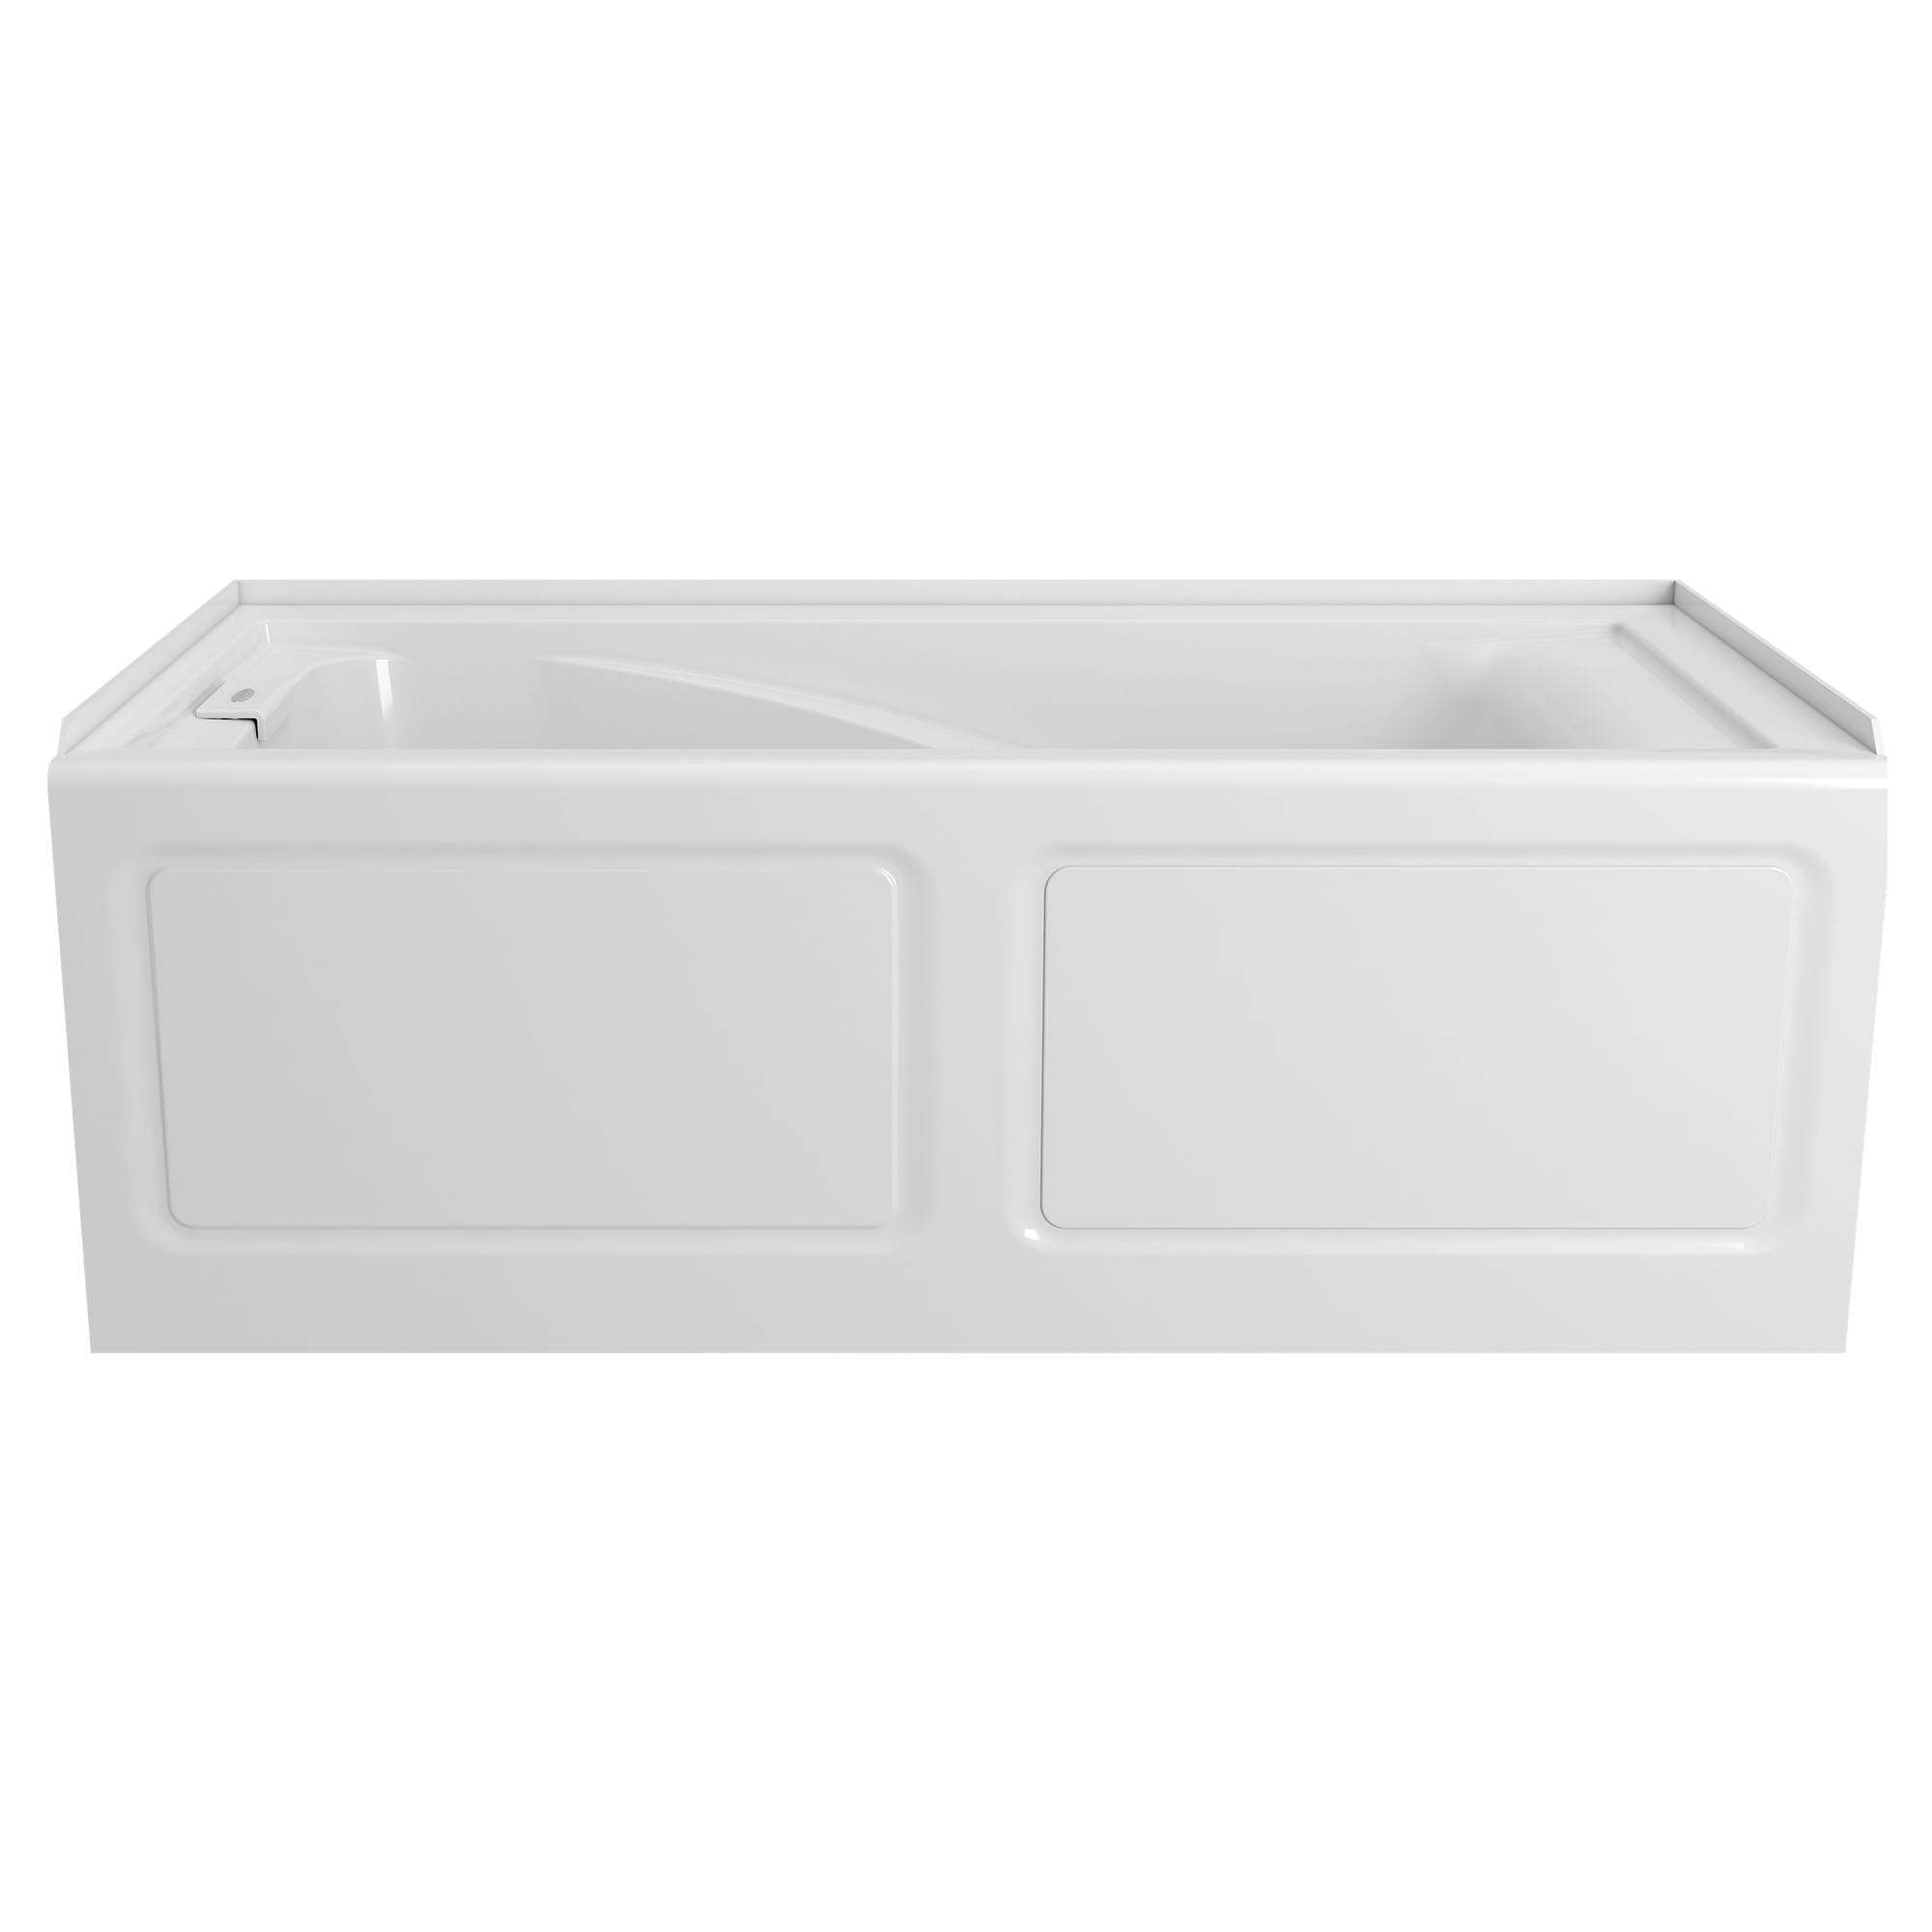 EverClean 60x32-Inch Integral Apron Deep Soak Bathtub with Left-Hand Outlet